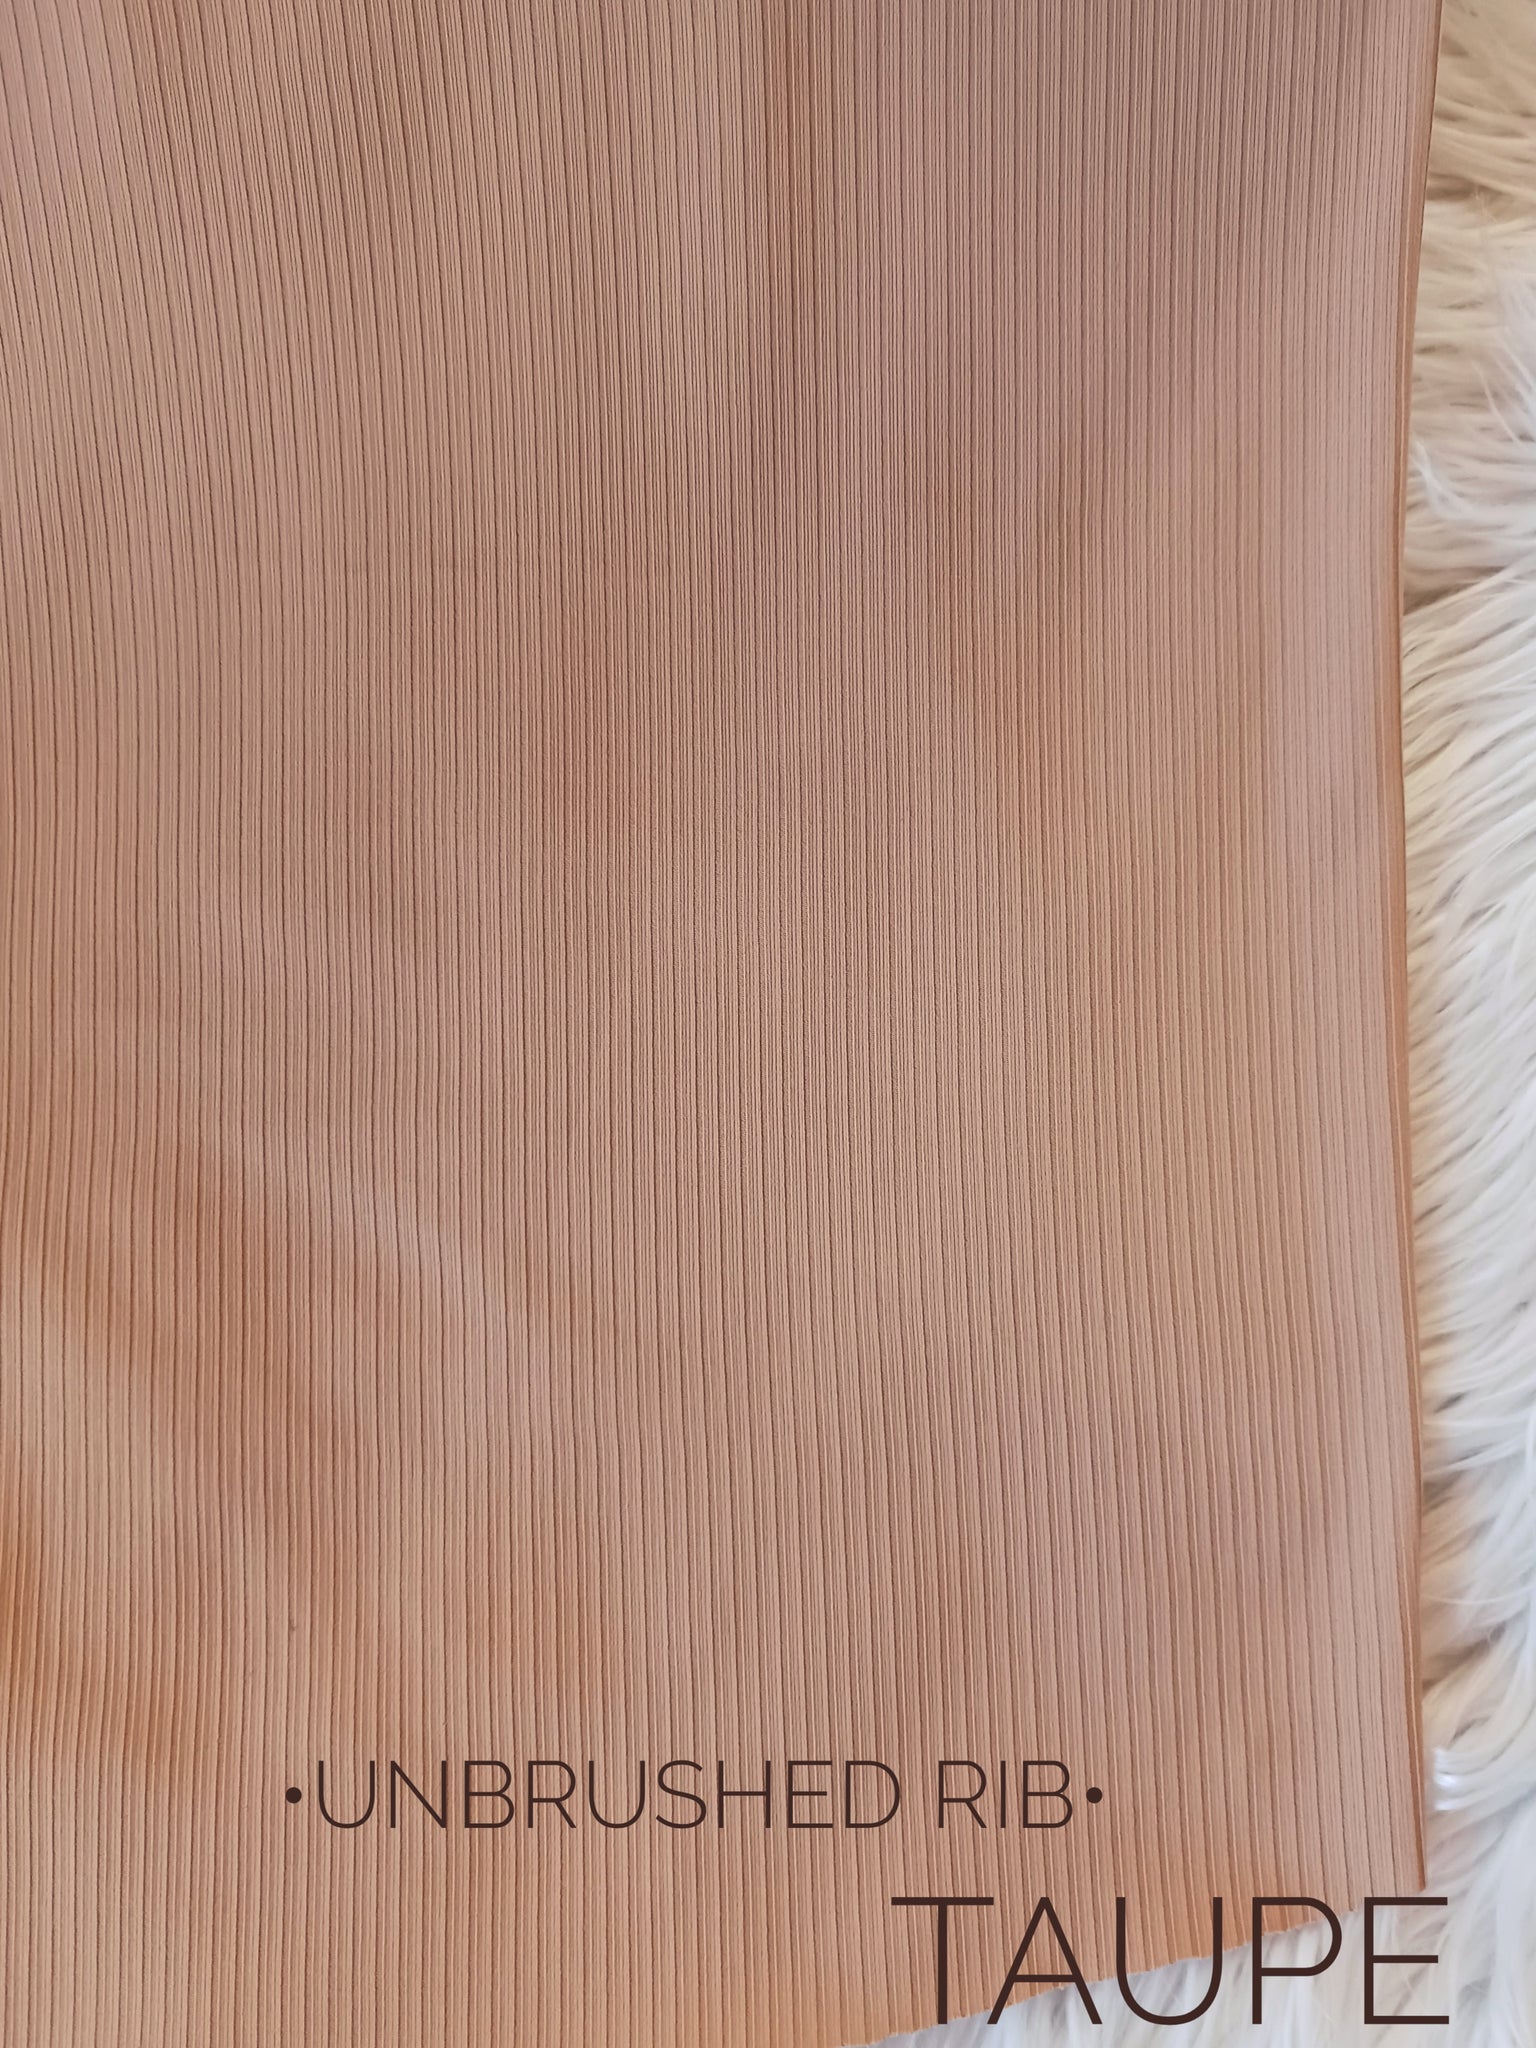 Taupe |Unbrushed Rib Knit|Solids |By the Half Yard